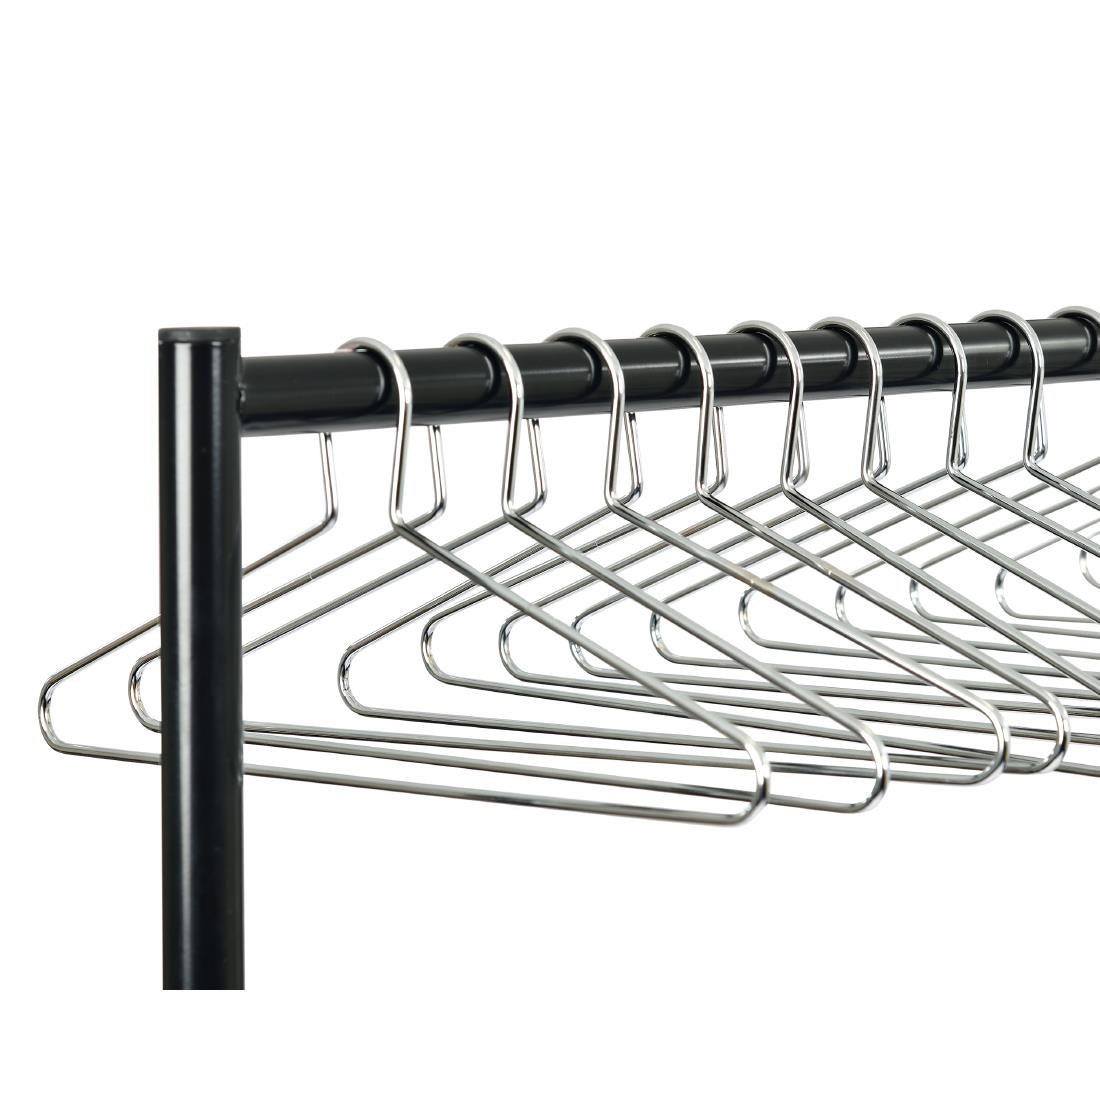 Chrome Plated Captive Steel Hangers Pack of 50 (DP715)